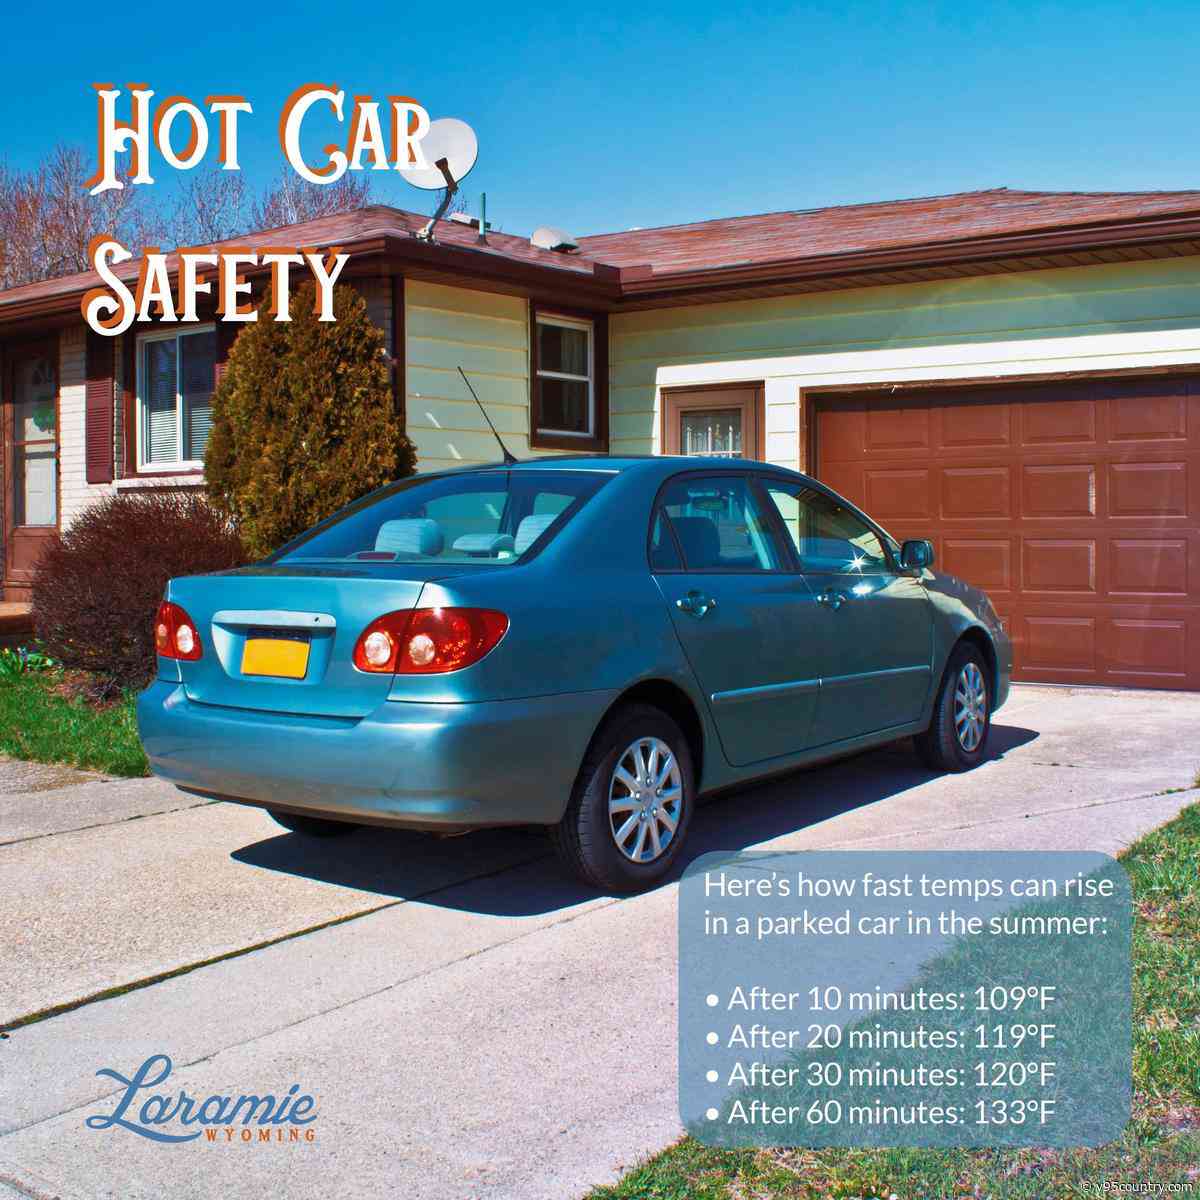 Laramie Police: Don’t Leave Kids Or Pets In Hot Cars